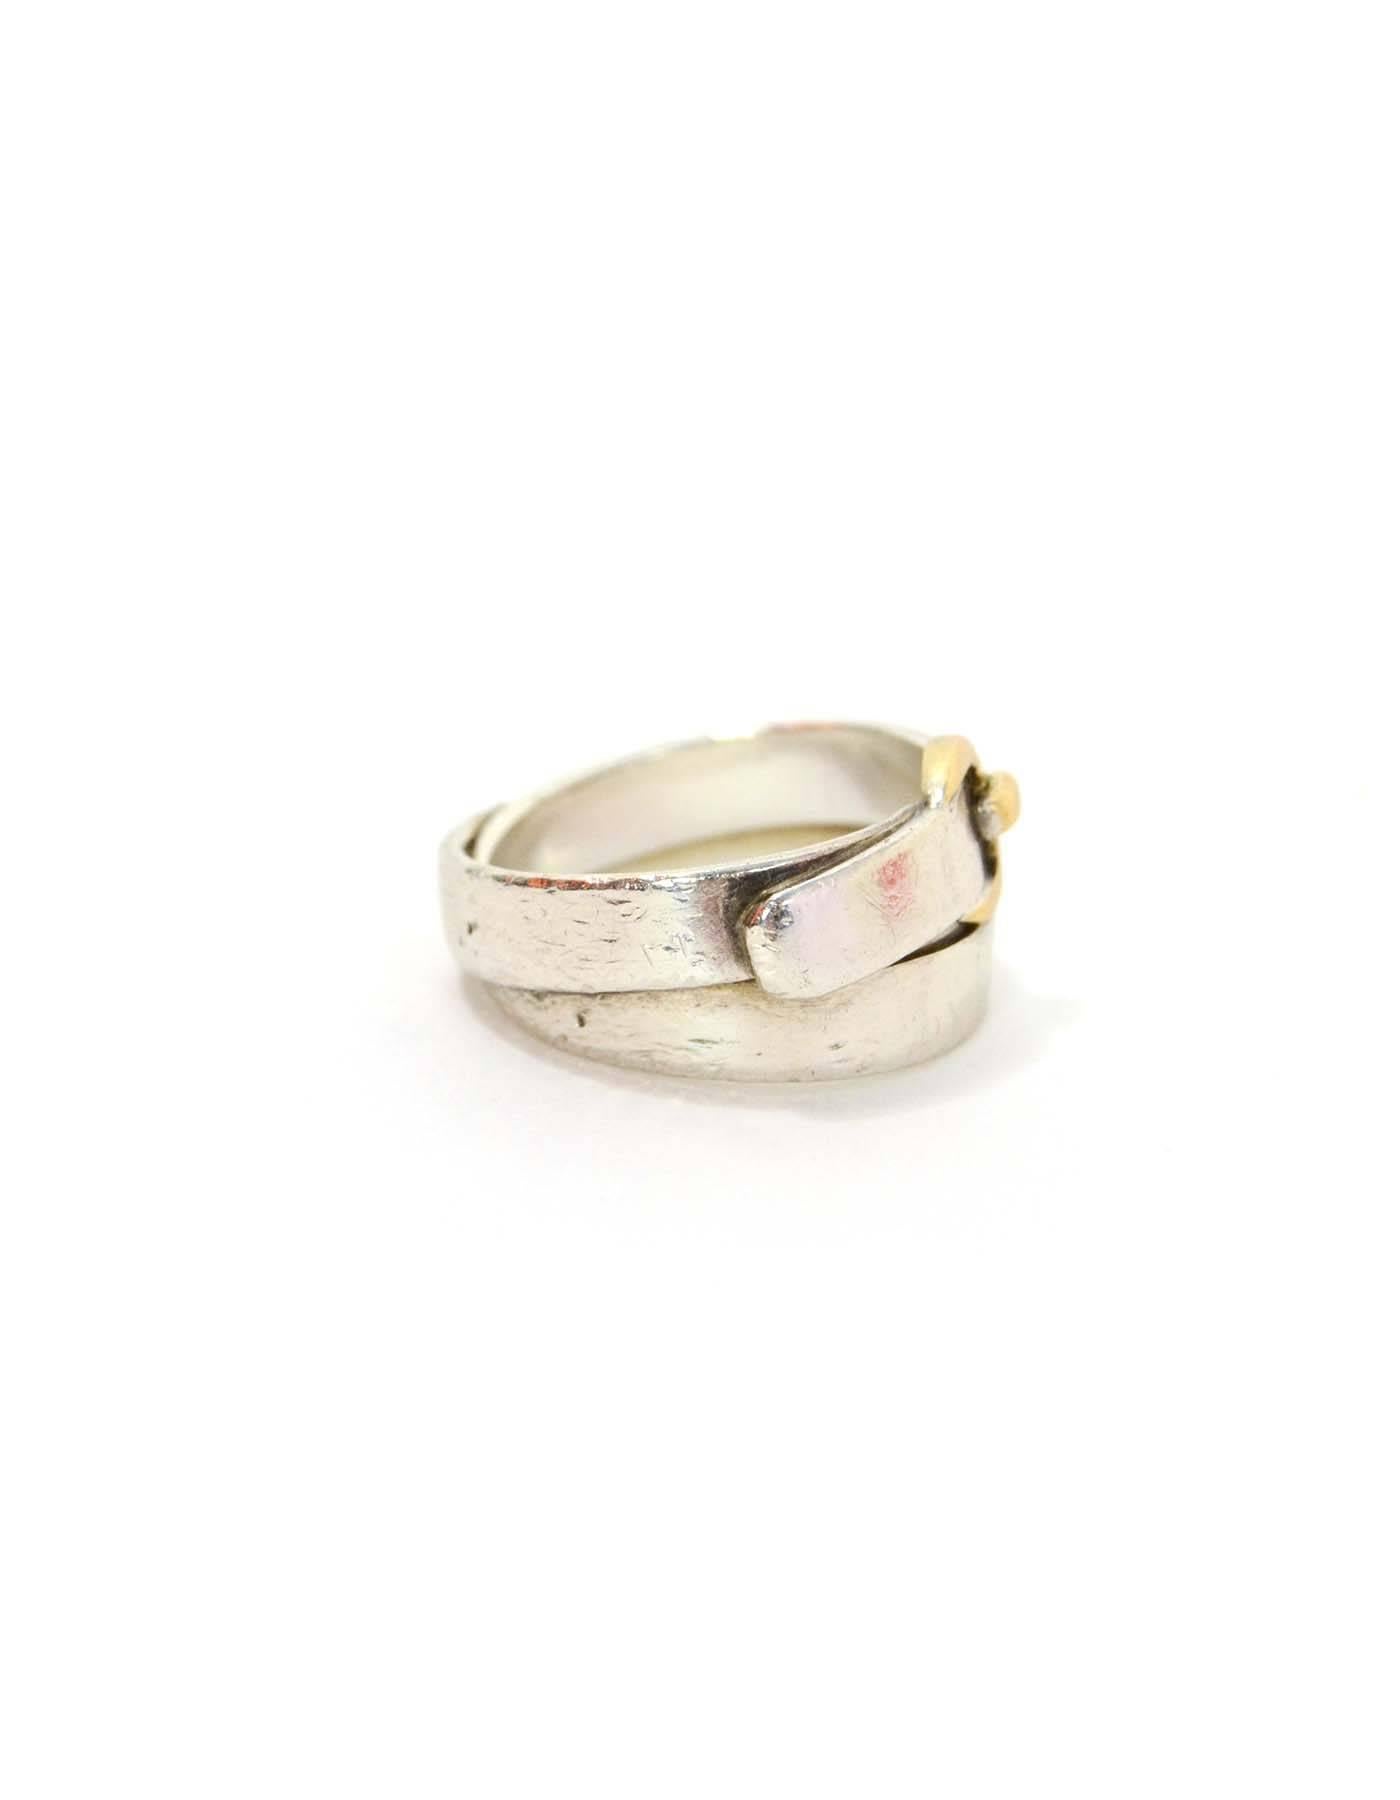 Hermes Sterling Wrap Around Buckle Ring 
Features goldtone buckle

Color: Silver and goldtone
Materials: Sterling silver
Closure: None
Stamp: Hermes 925 48
Overall Condition: Good pre-owned condition with the exception of nicks and scratching